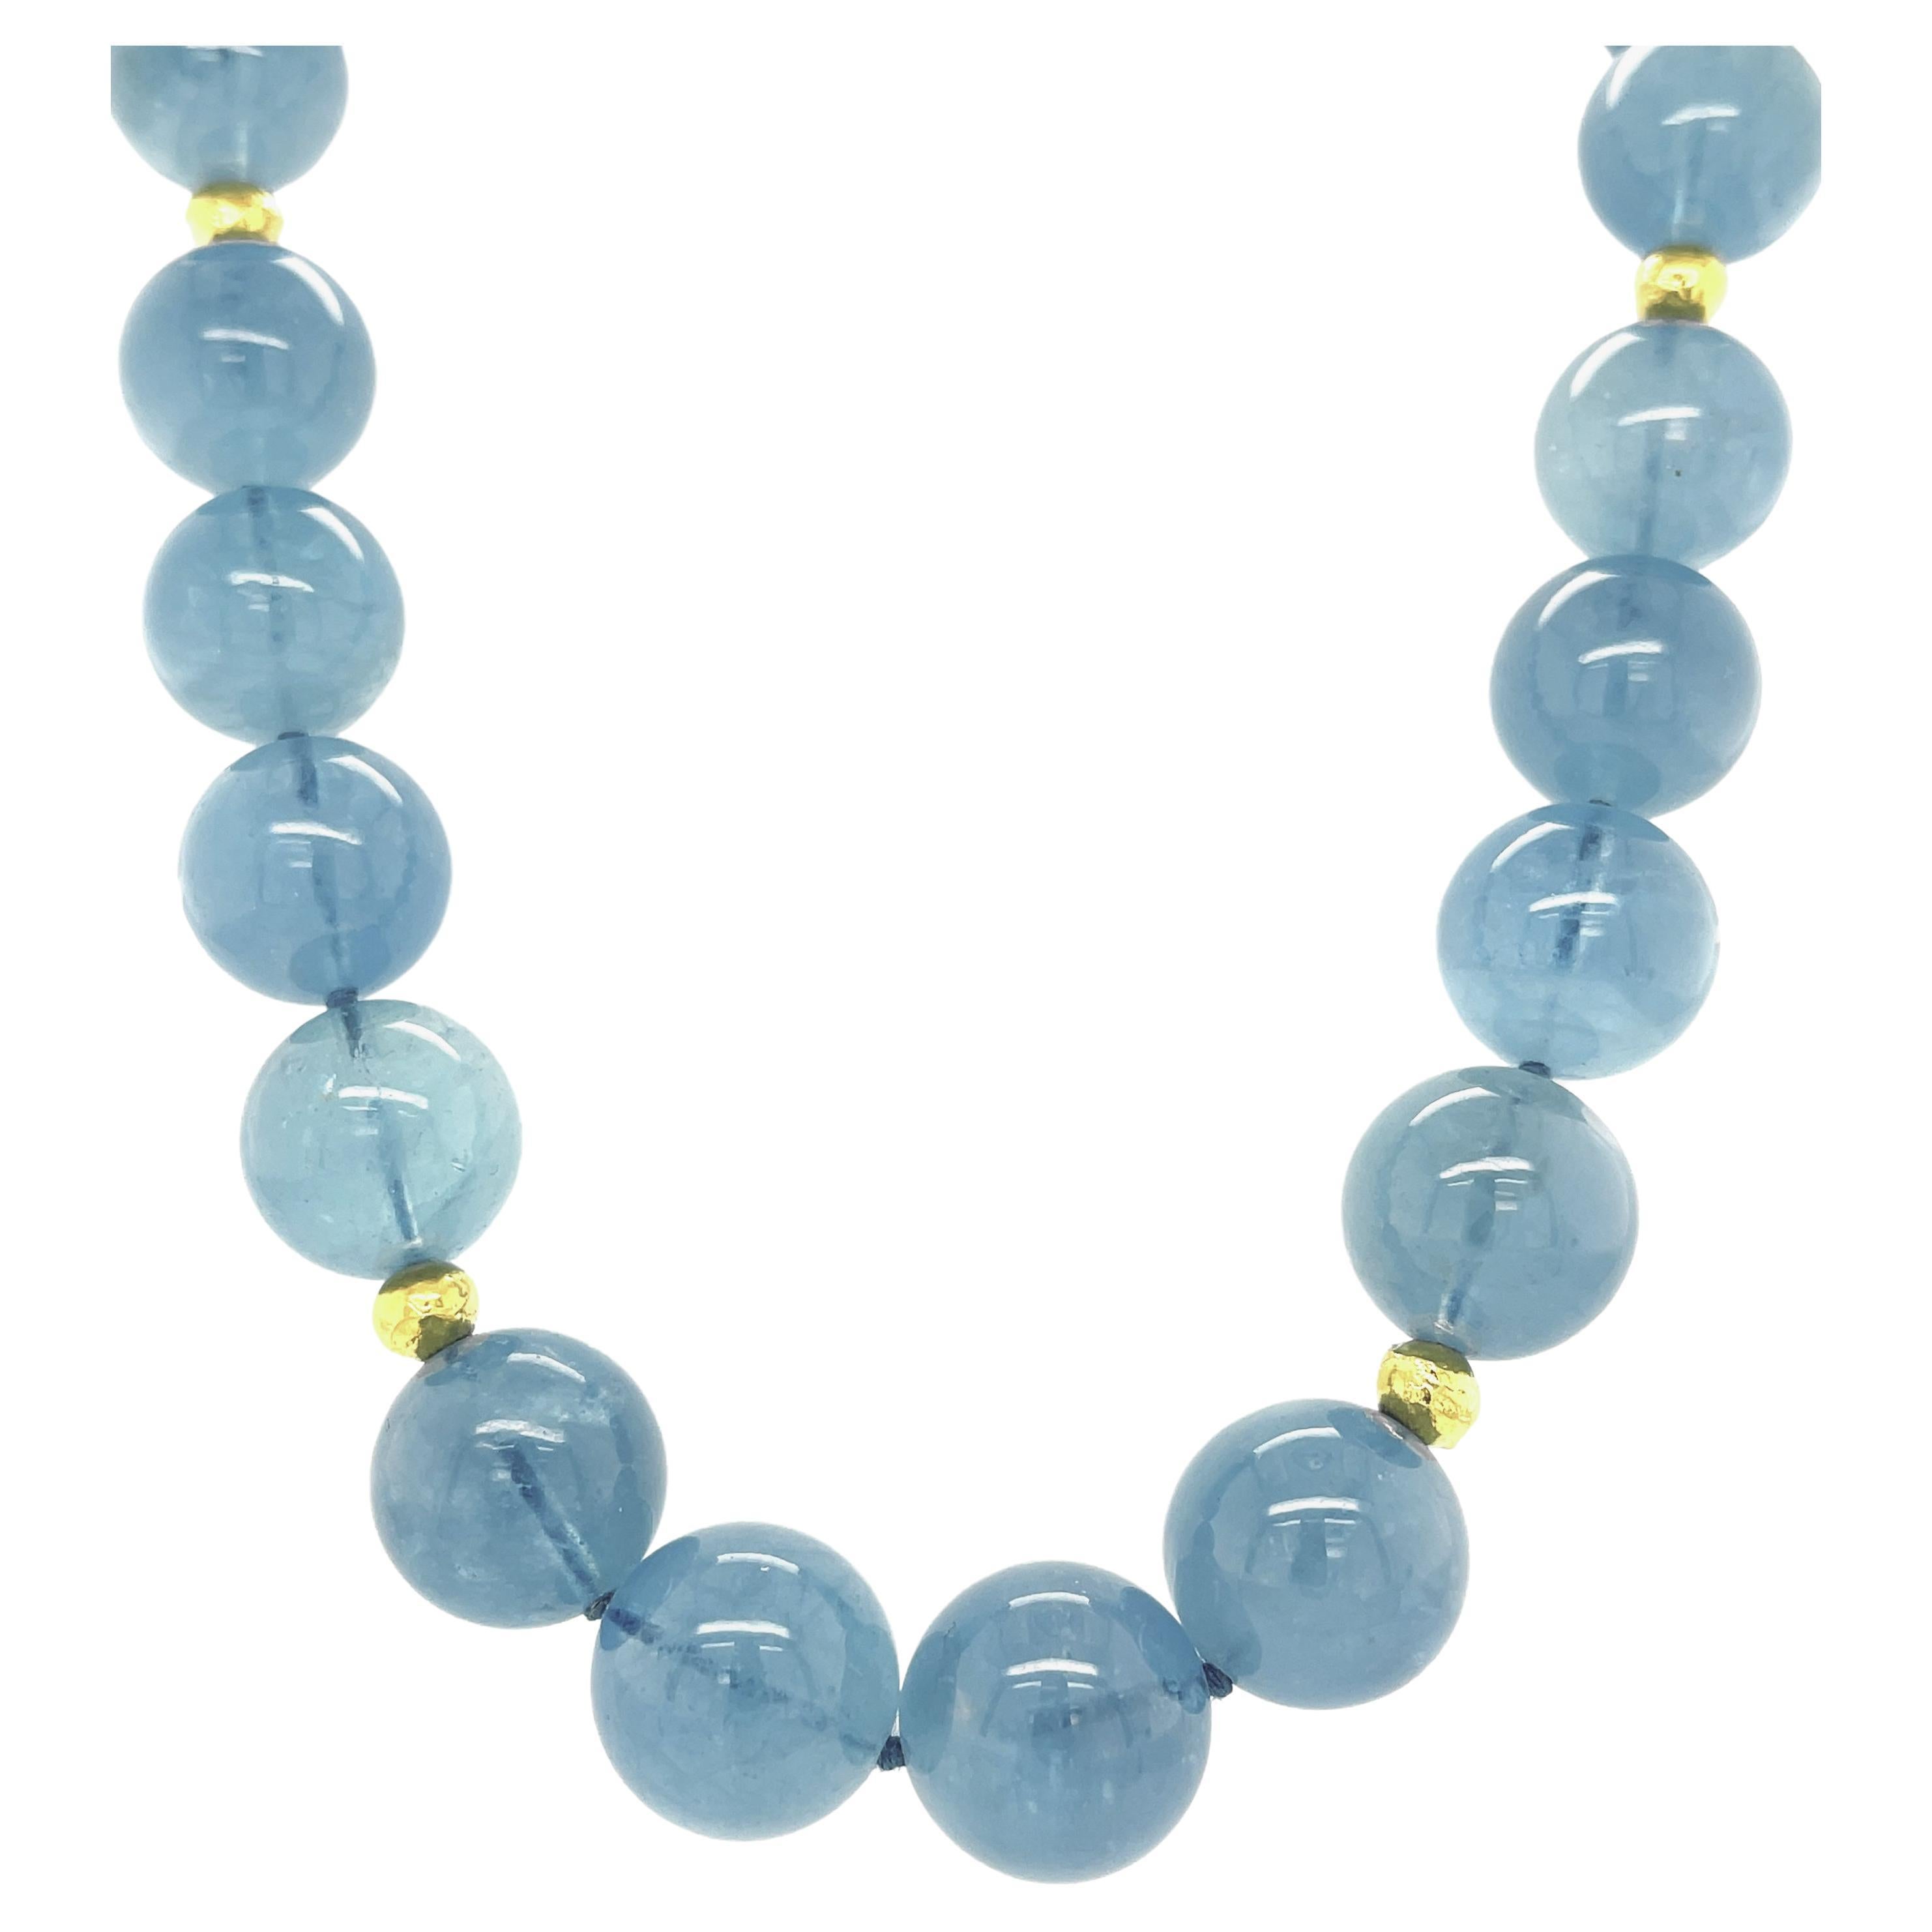 14 to 15mm Round Aquamarine Bead Necklace with Yellow Gold Accents, 18.5 Inches For Sale